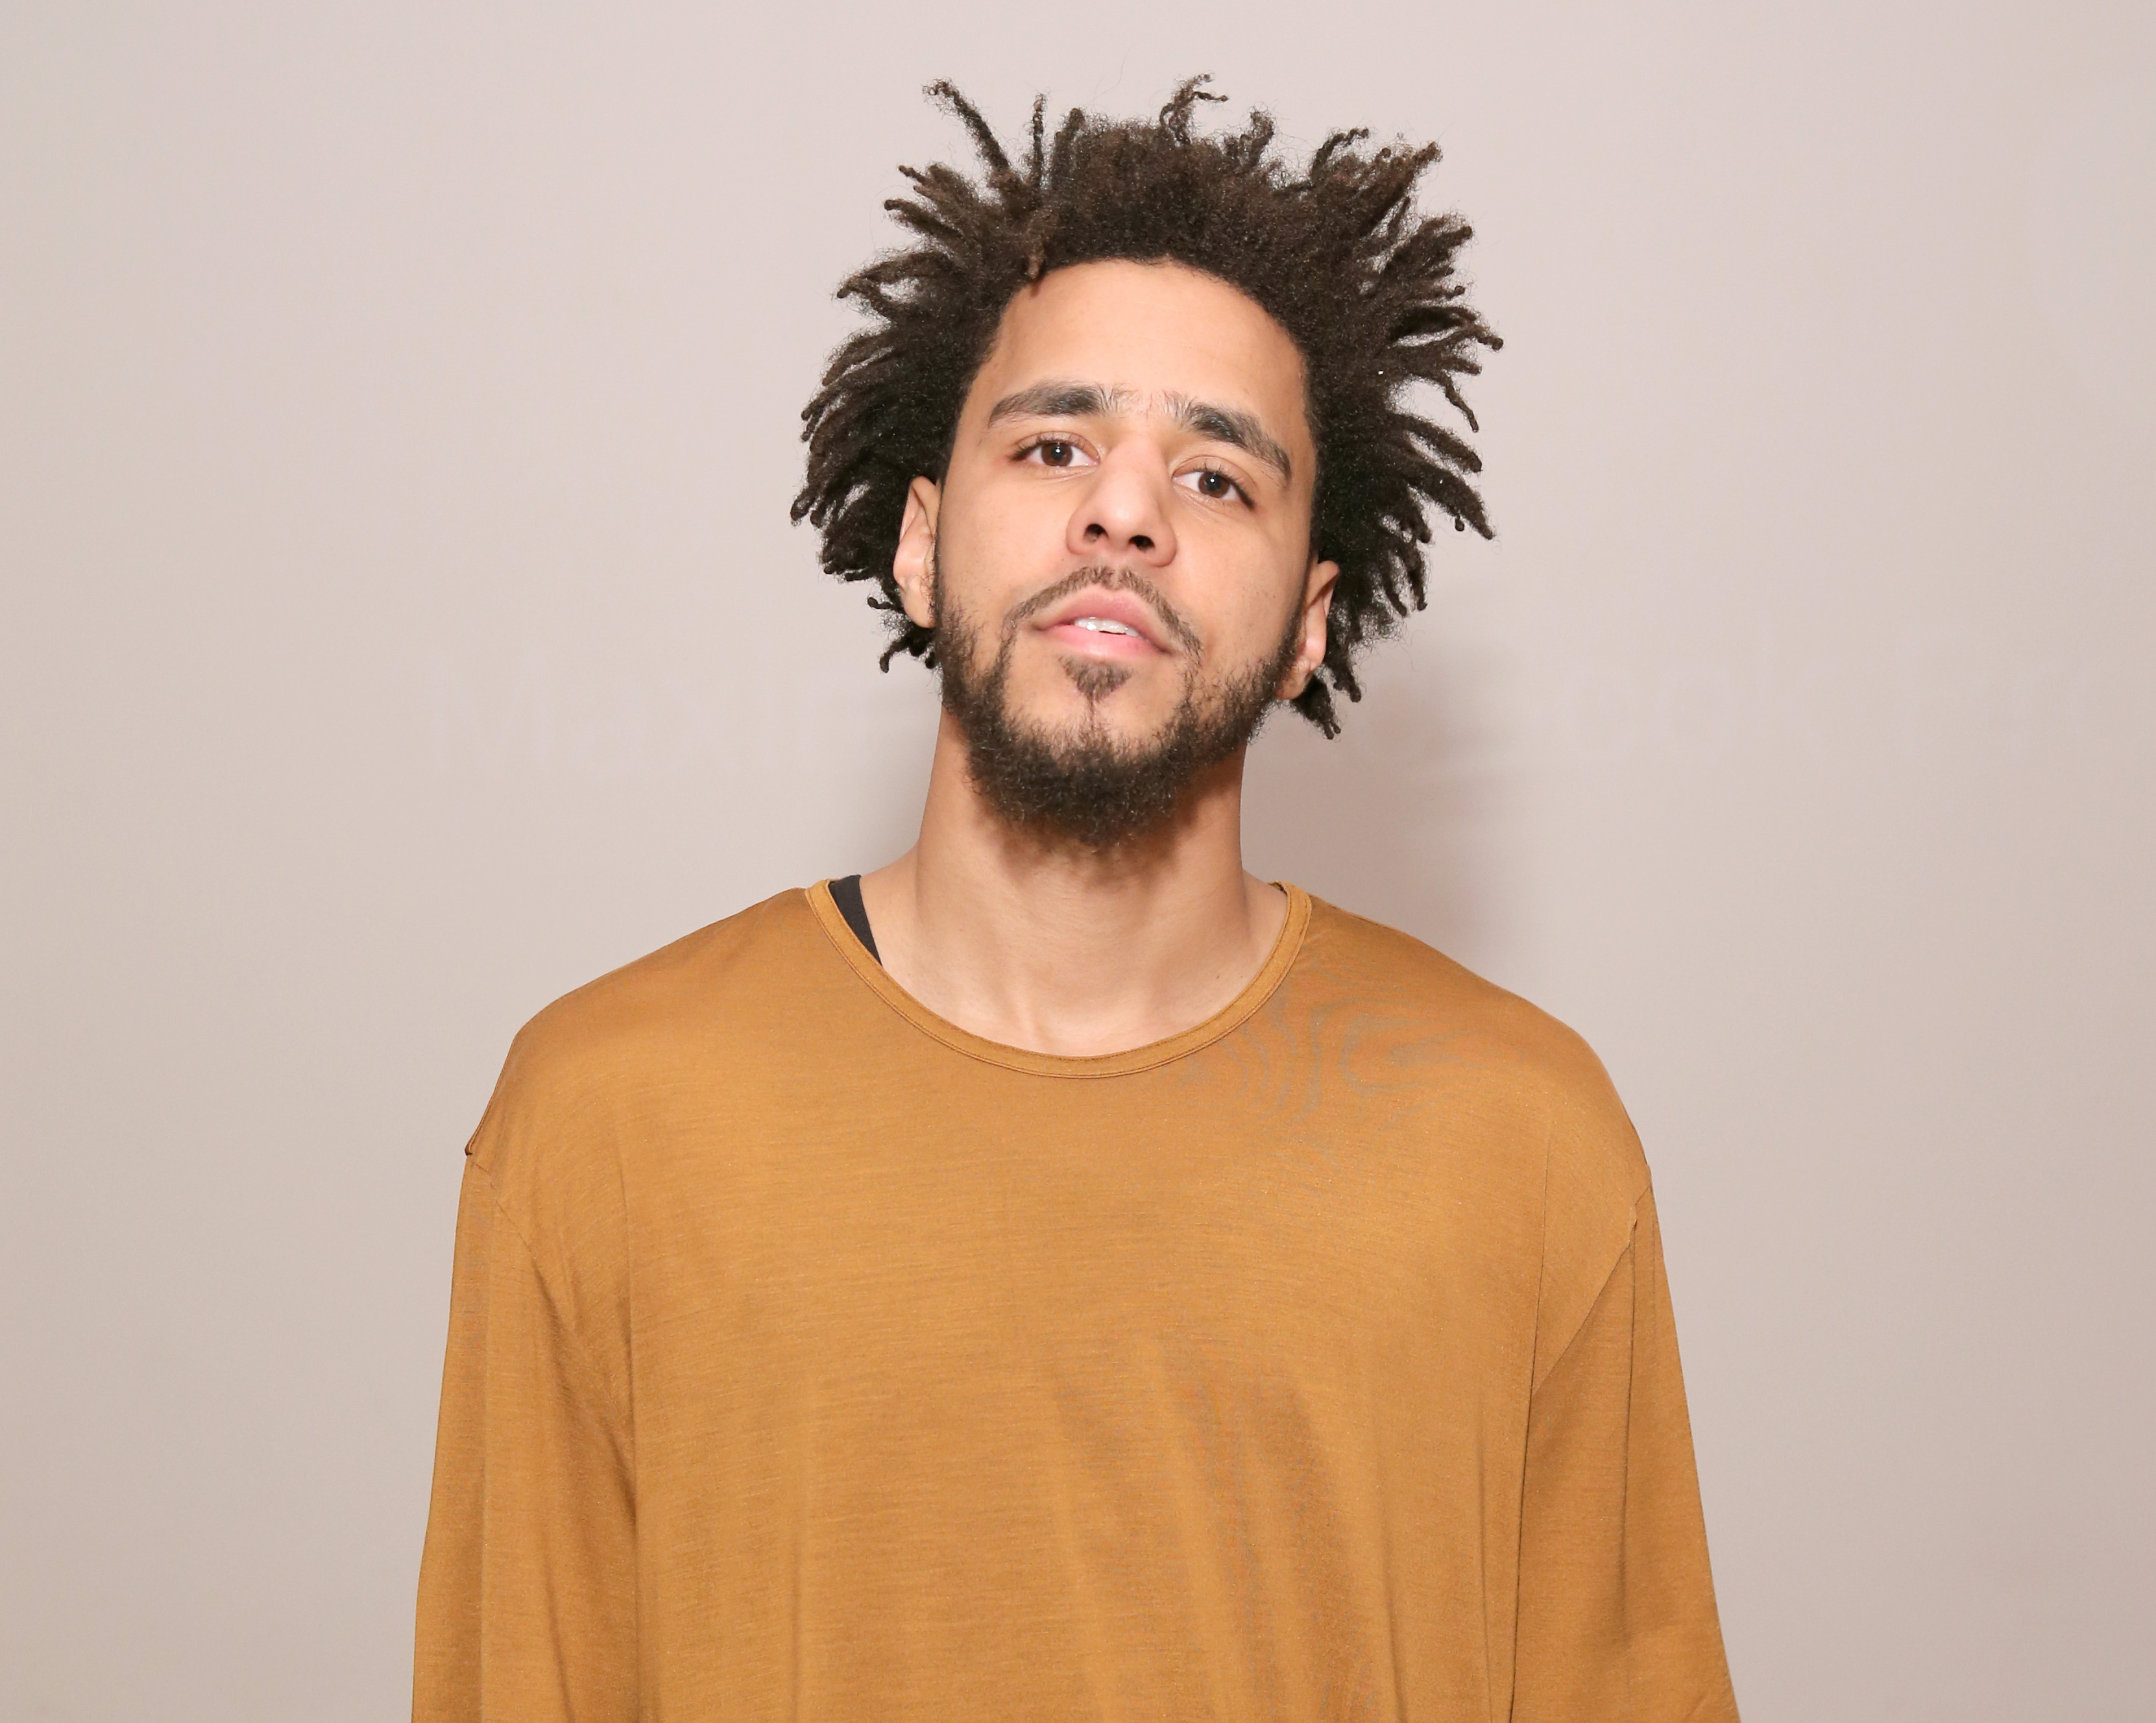 HQ J Cole Wallpapers | File 2824.96Kb